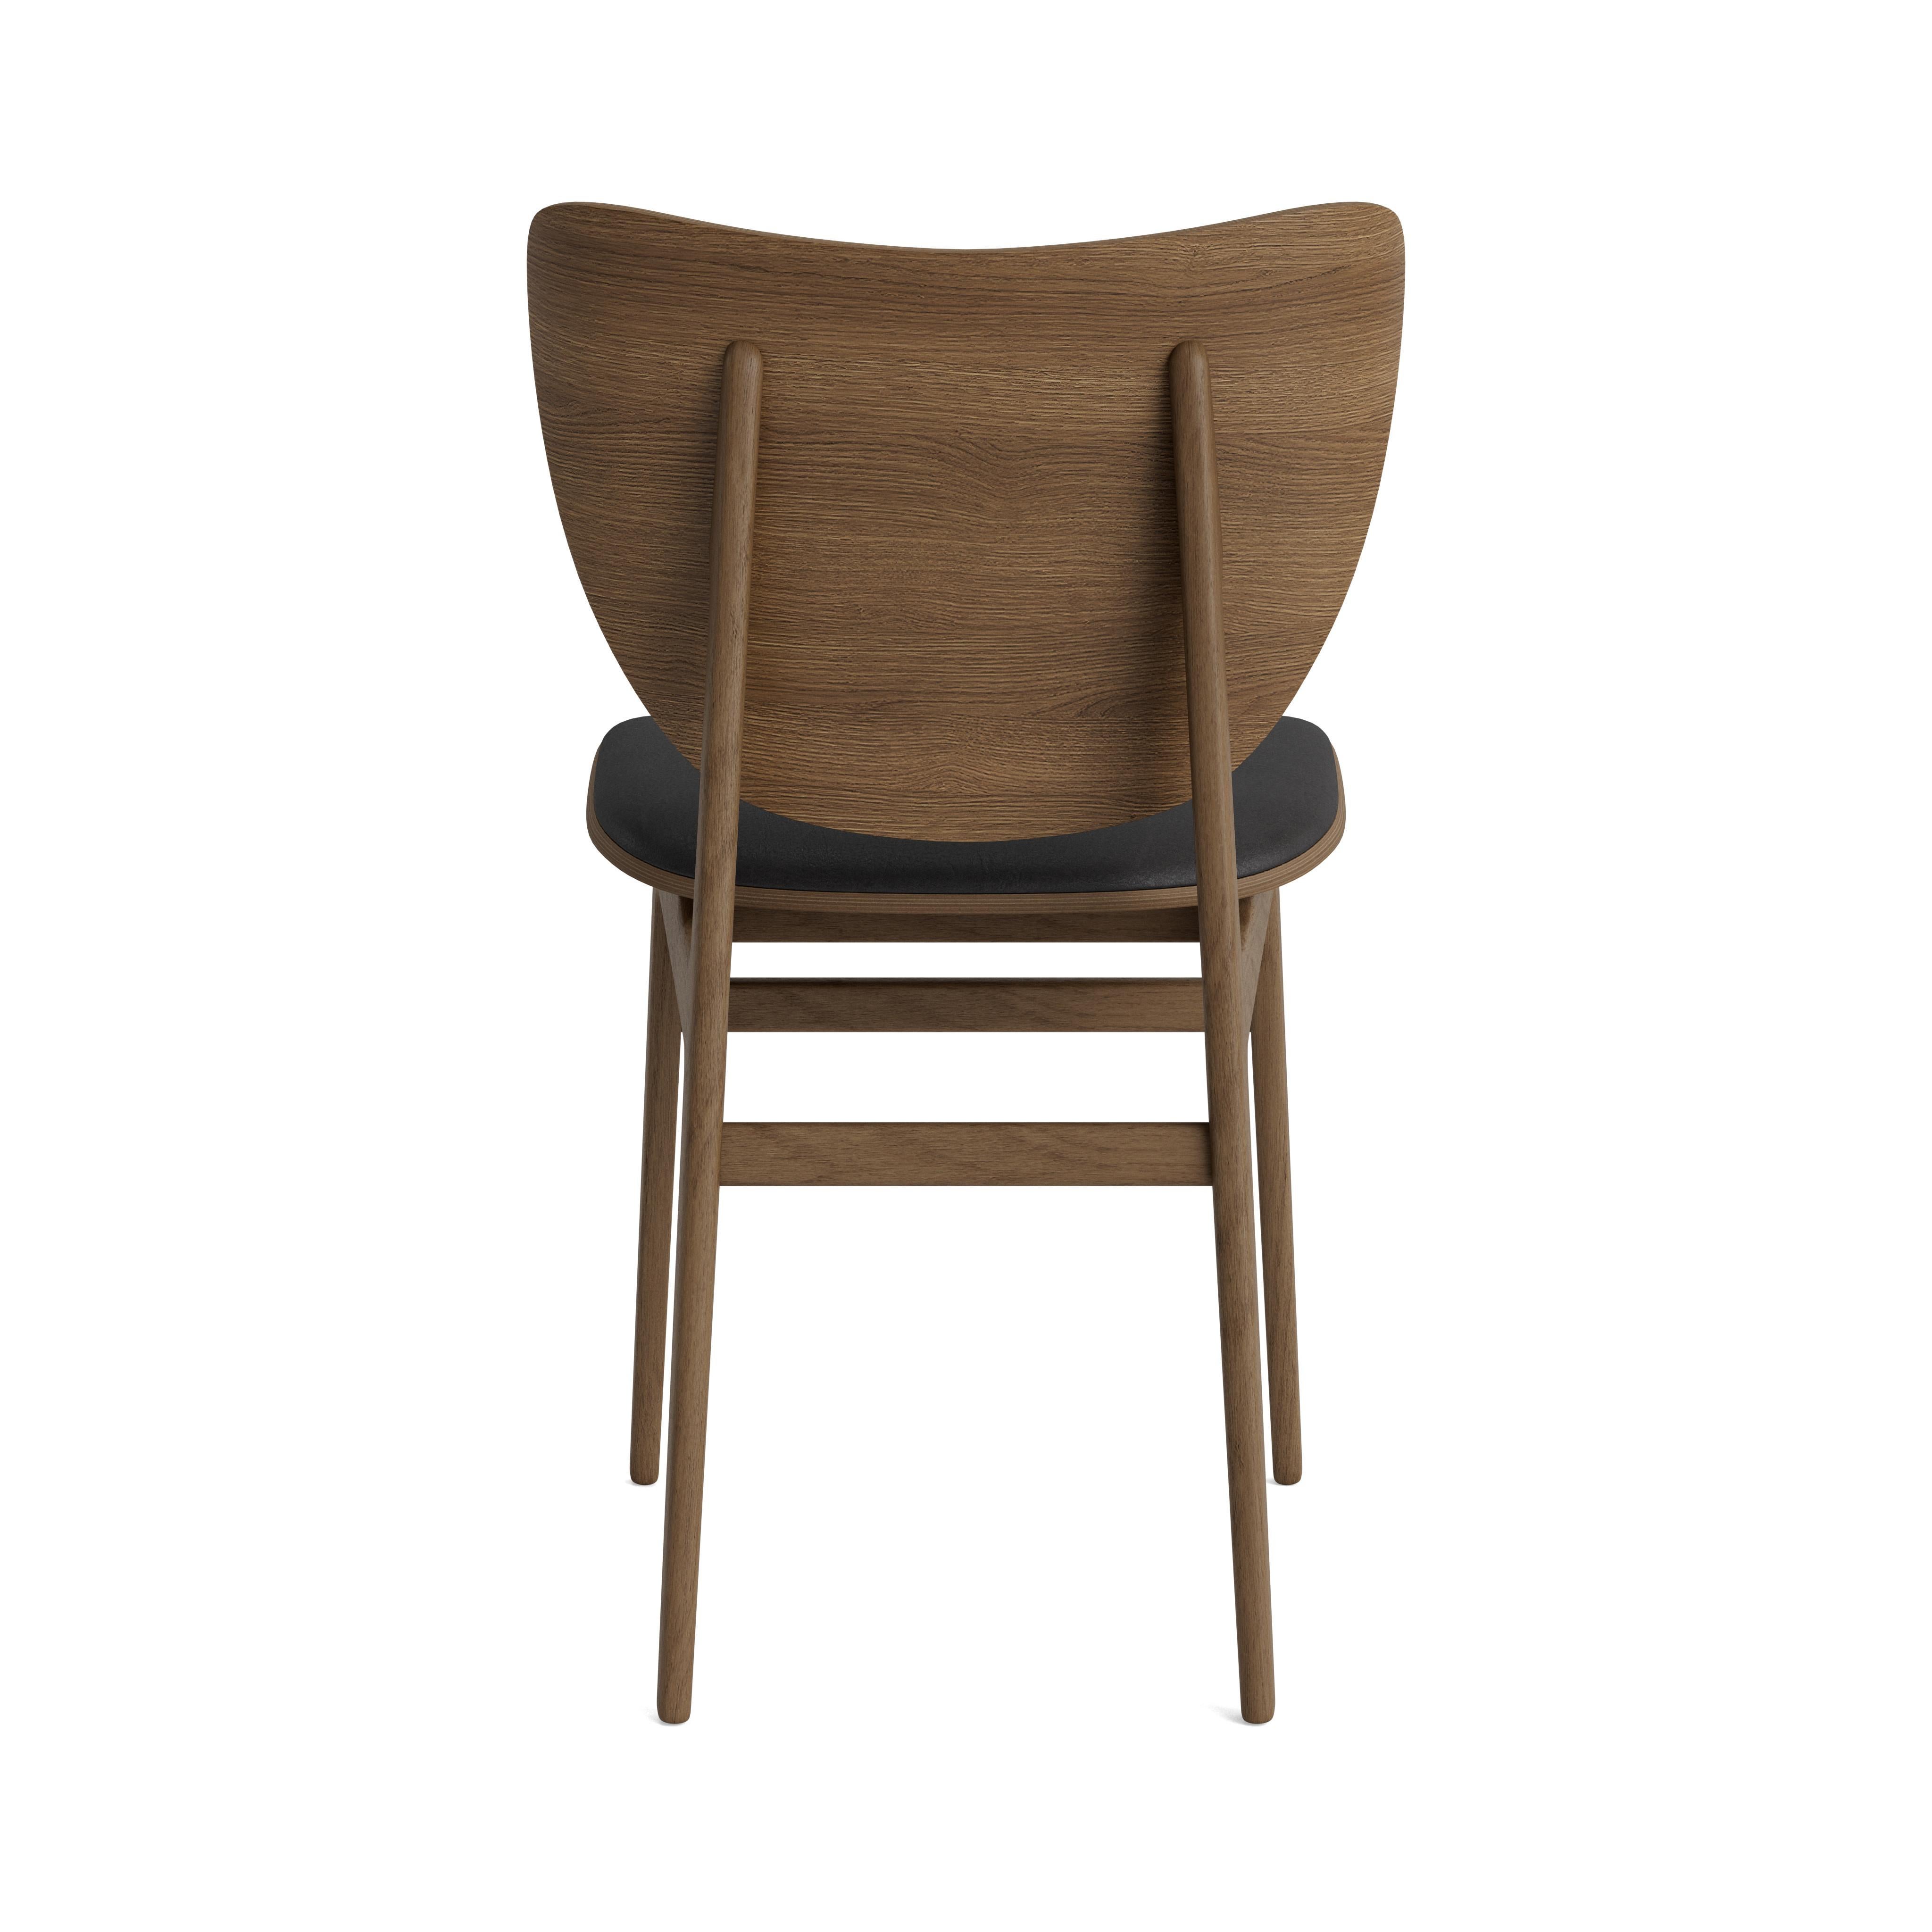 Elephant Dining Chair by NORR11
Dimensions: D 51 x W 47 x H 80,5 cm. SH 45,5 cm.
Materials: Light smoked oak and upholstery.
Upholstery: Dunes Anthrazite 21003. 

Available in different oak finishes: Natural oak, light smoked oak, dark smoked oak,